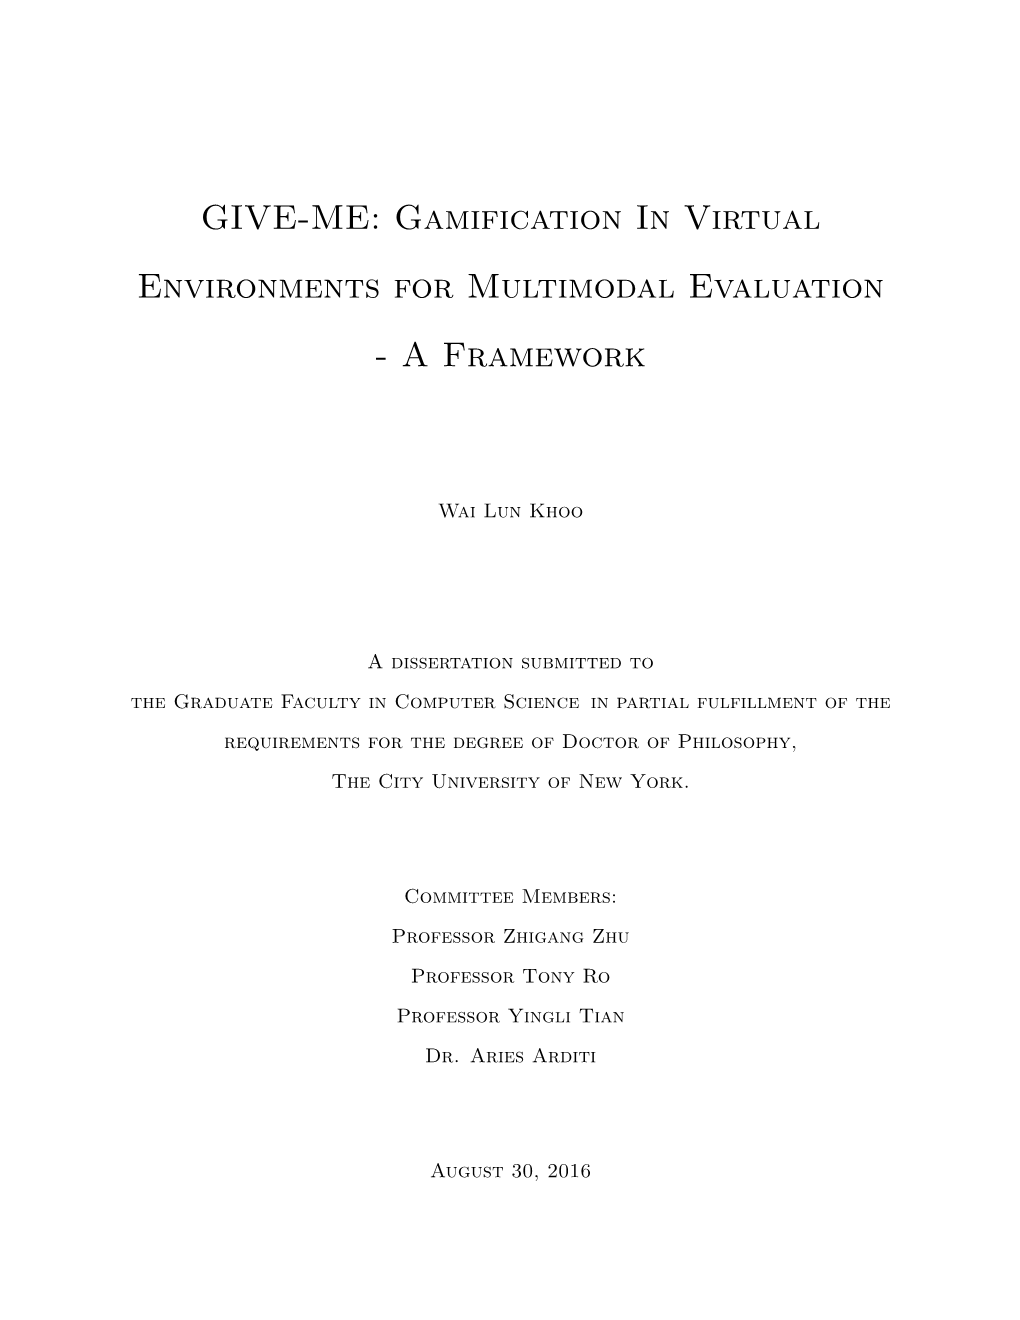 GIVE-ME: Gamification in Virtual Environments for Multimodal Evaluation- a Framework